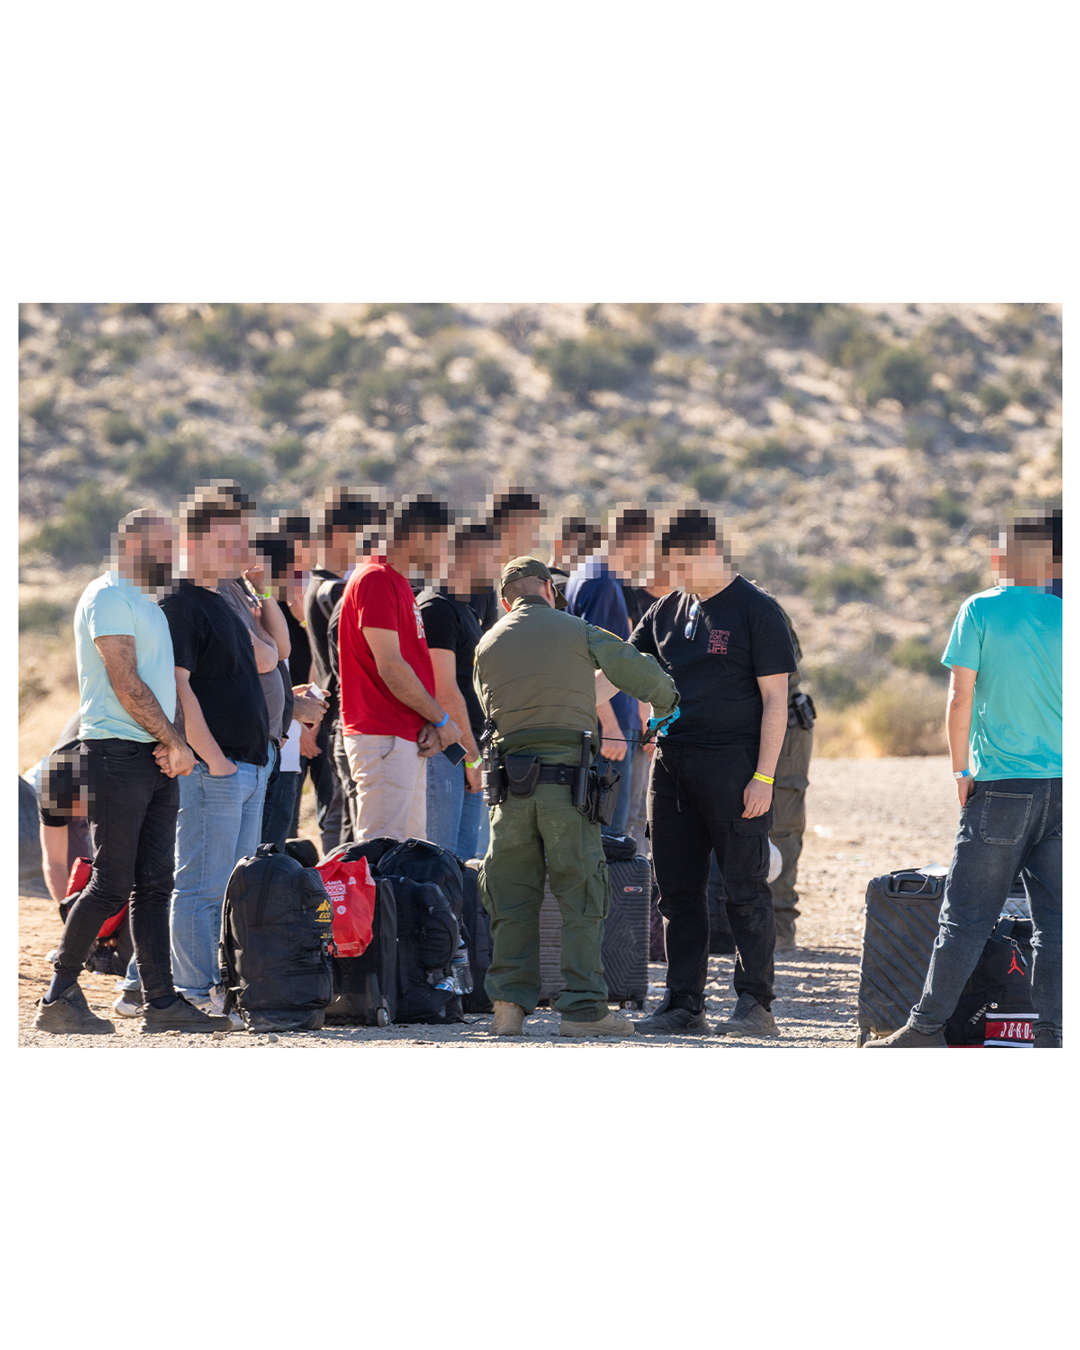 A border patrol agent stands in front of a large group of migrants. In his hand is a set of wire cutters, which he uses to cut the drawstring from the man’s sweatpants. Migrants aren’t allowed drawstrings or shoelaces.. Most of the migrants can be seen wearing either a yellow or a blue wristband. Rocky desert hills dominate the background.